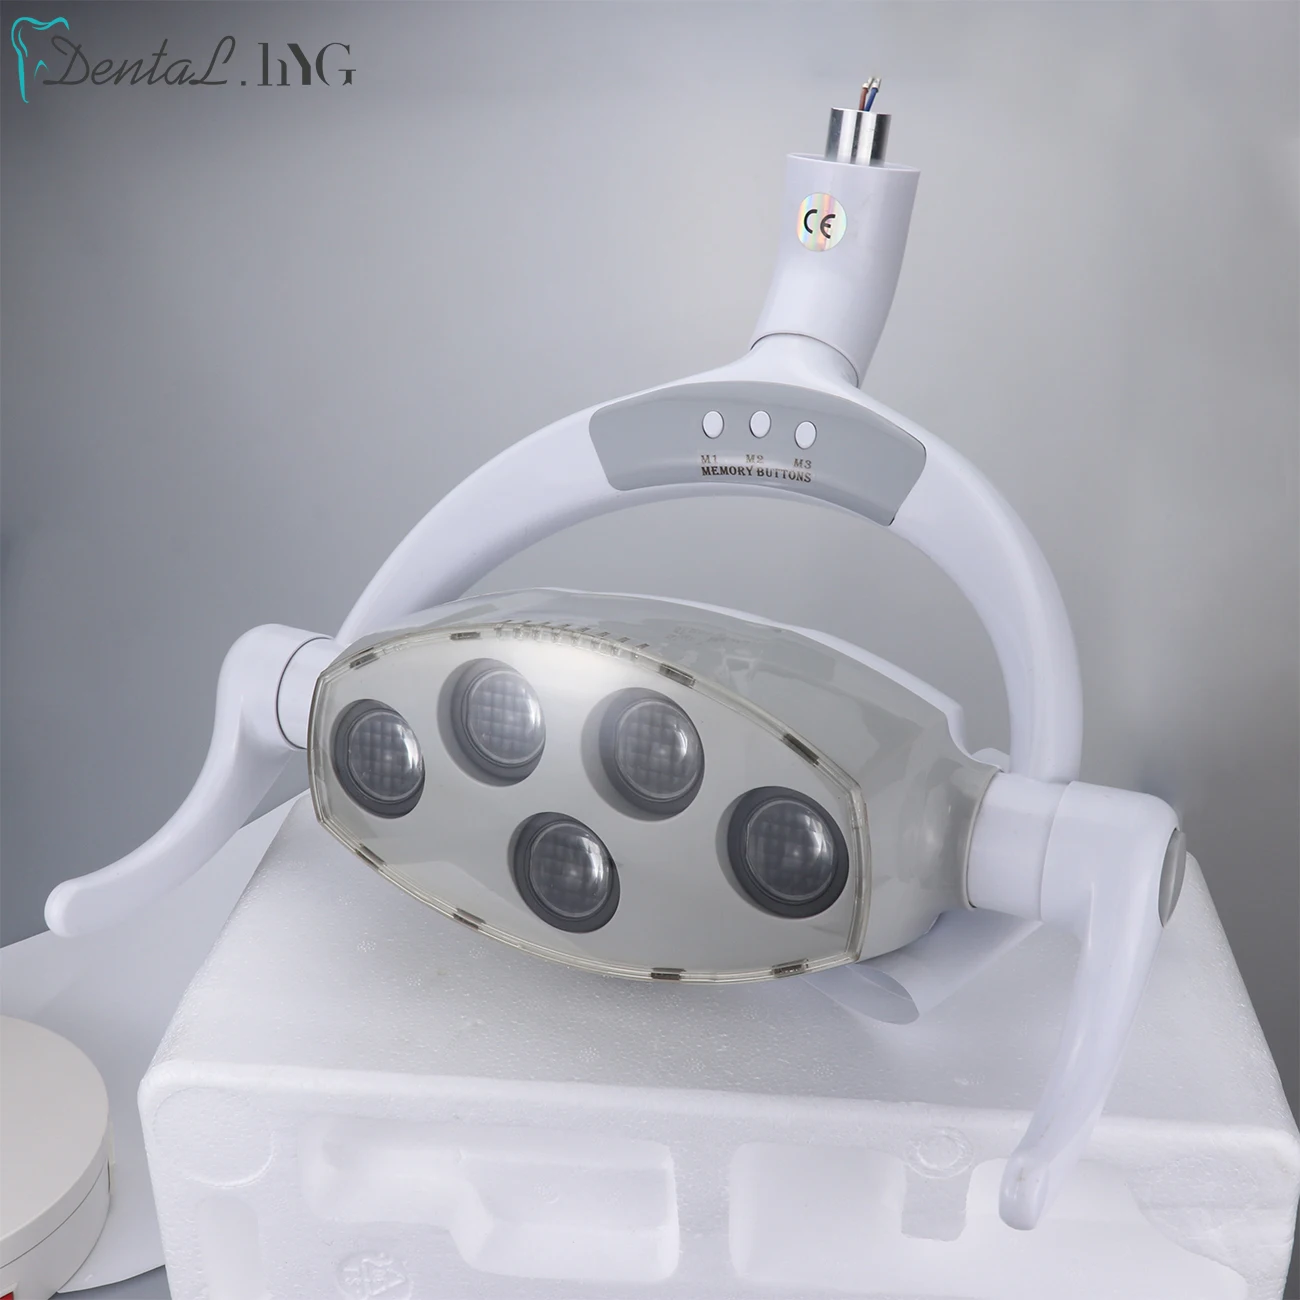 Dental LED Induction Lamp, Dentes Light Tool, Shadowless, Oral, Dental Chair Unit Parts Operation, Easy Install, 20W